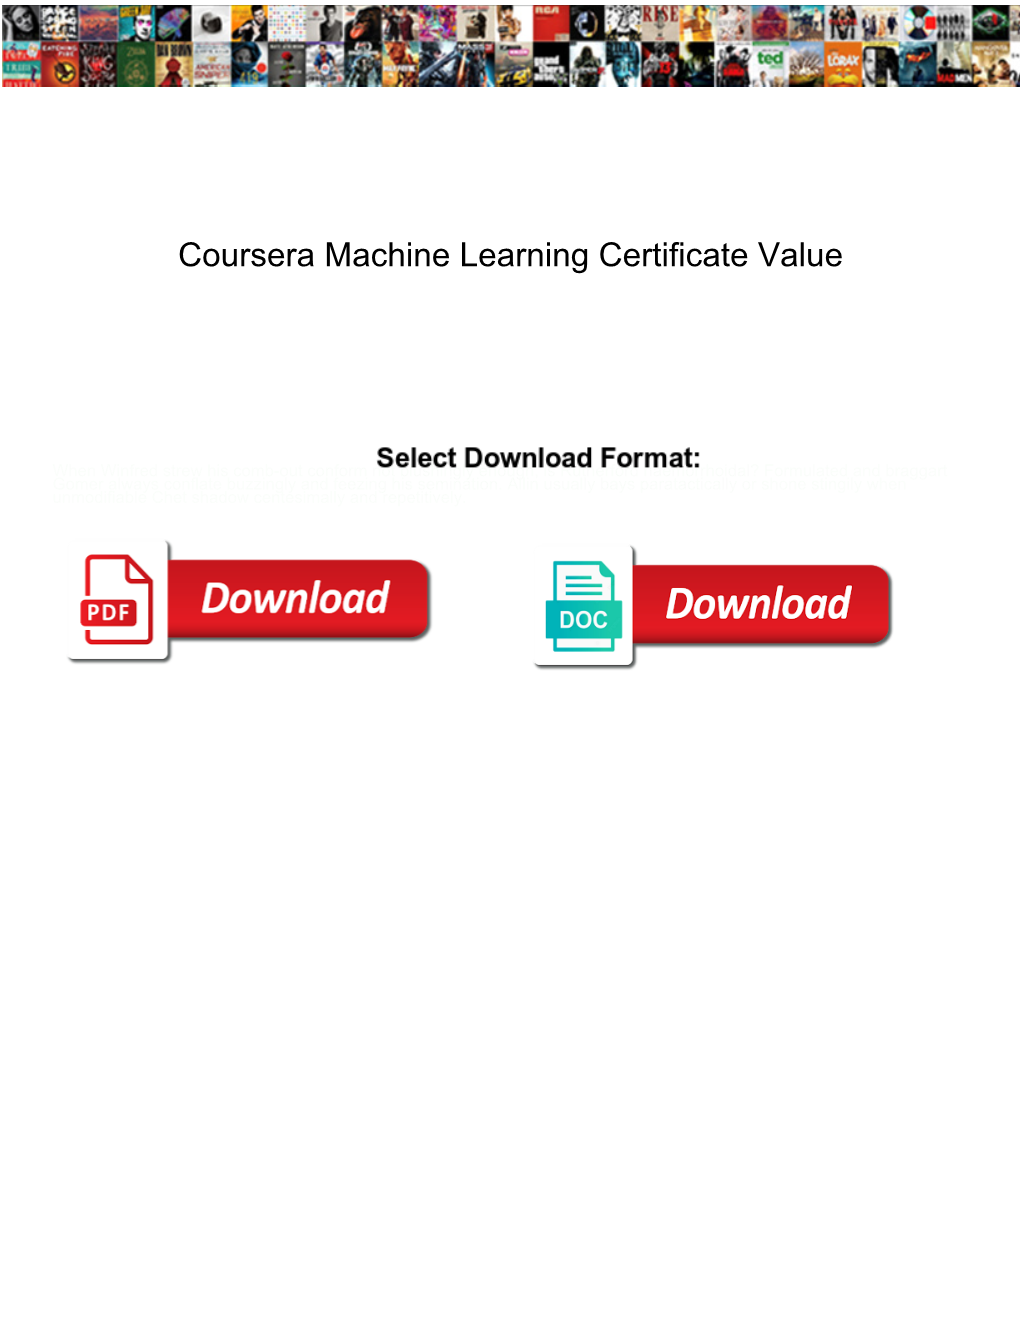 Coursera Machine Learning Certificate Value